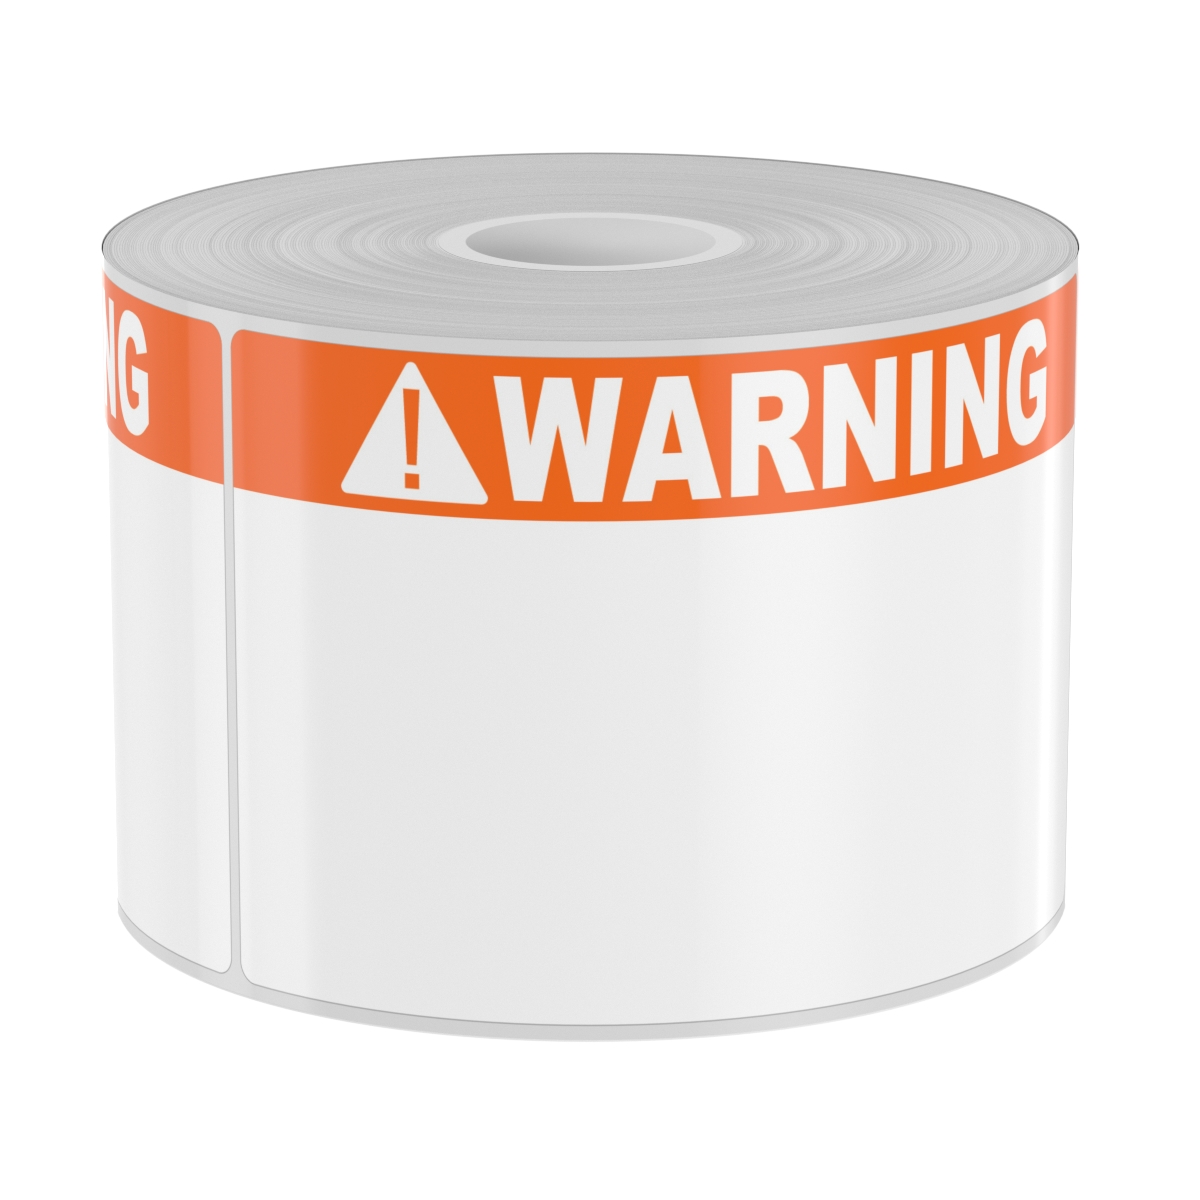 Ask a question about 250 3" x 5" High-Performance Die-Cut Orange Band Warning